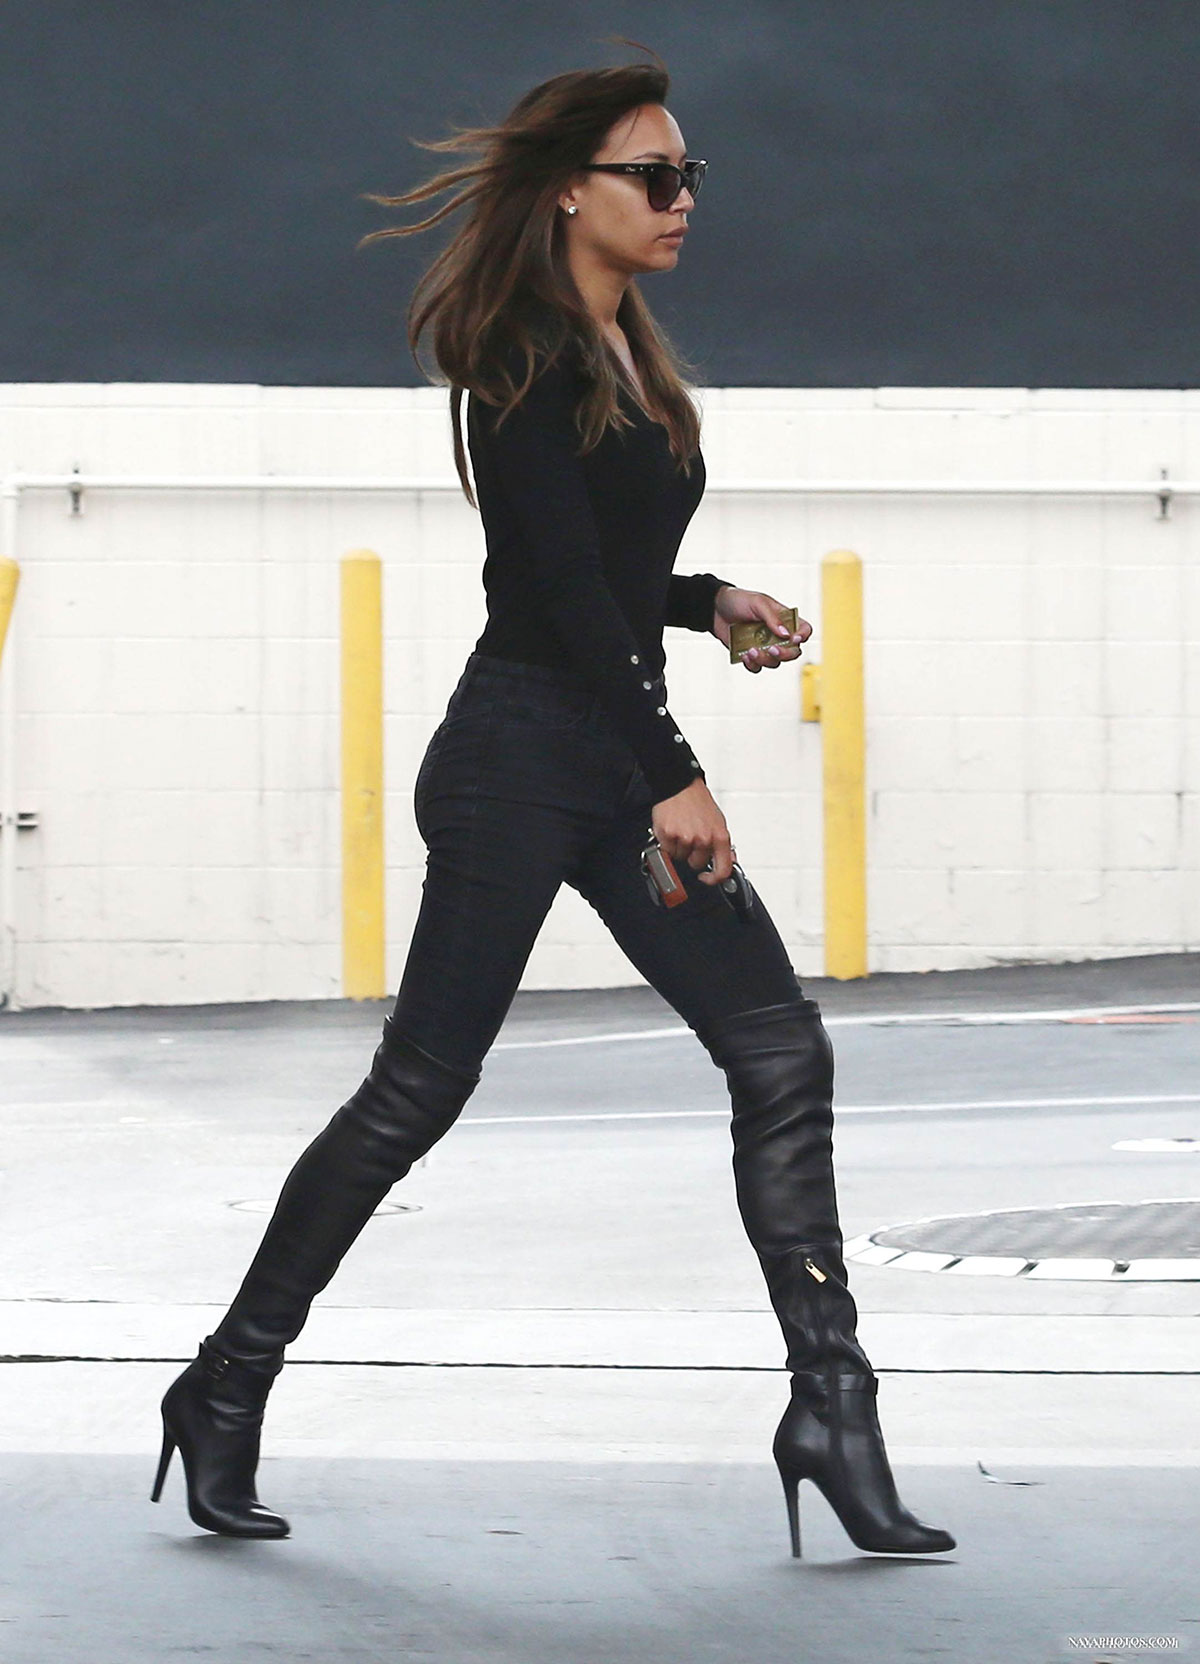 Naya Rivera heads out of Blushington after an appointment